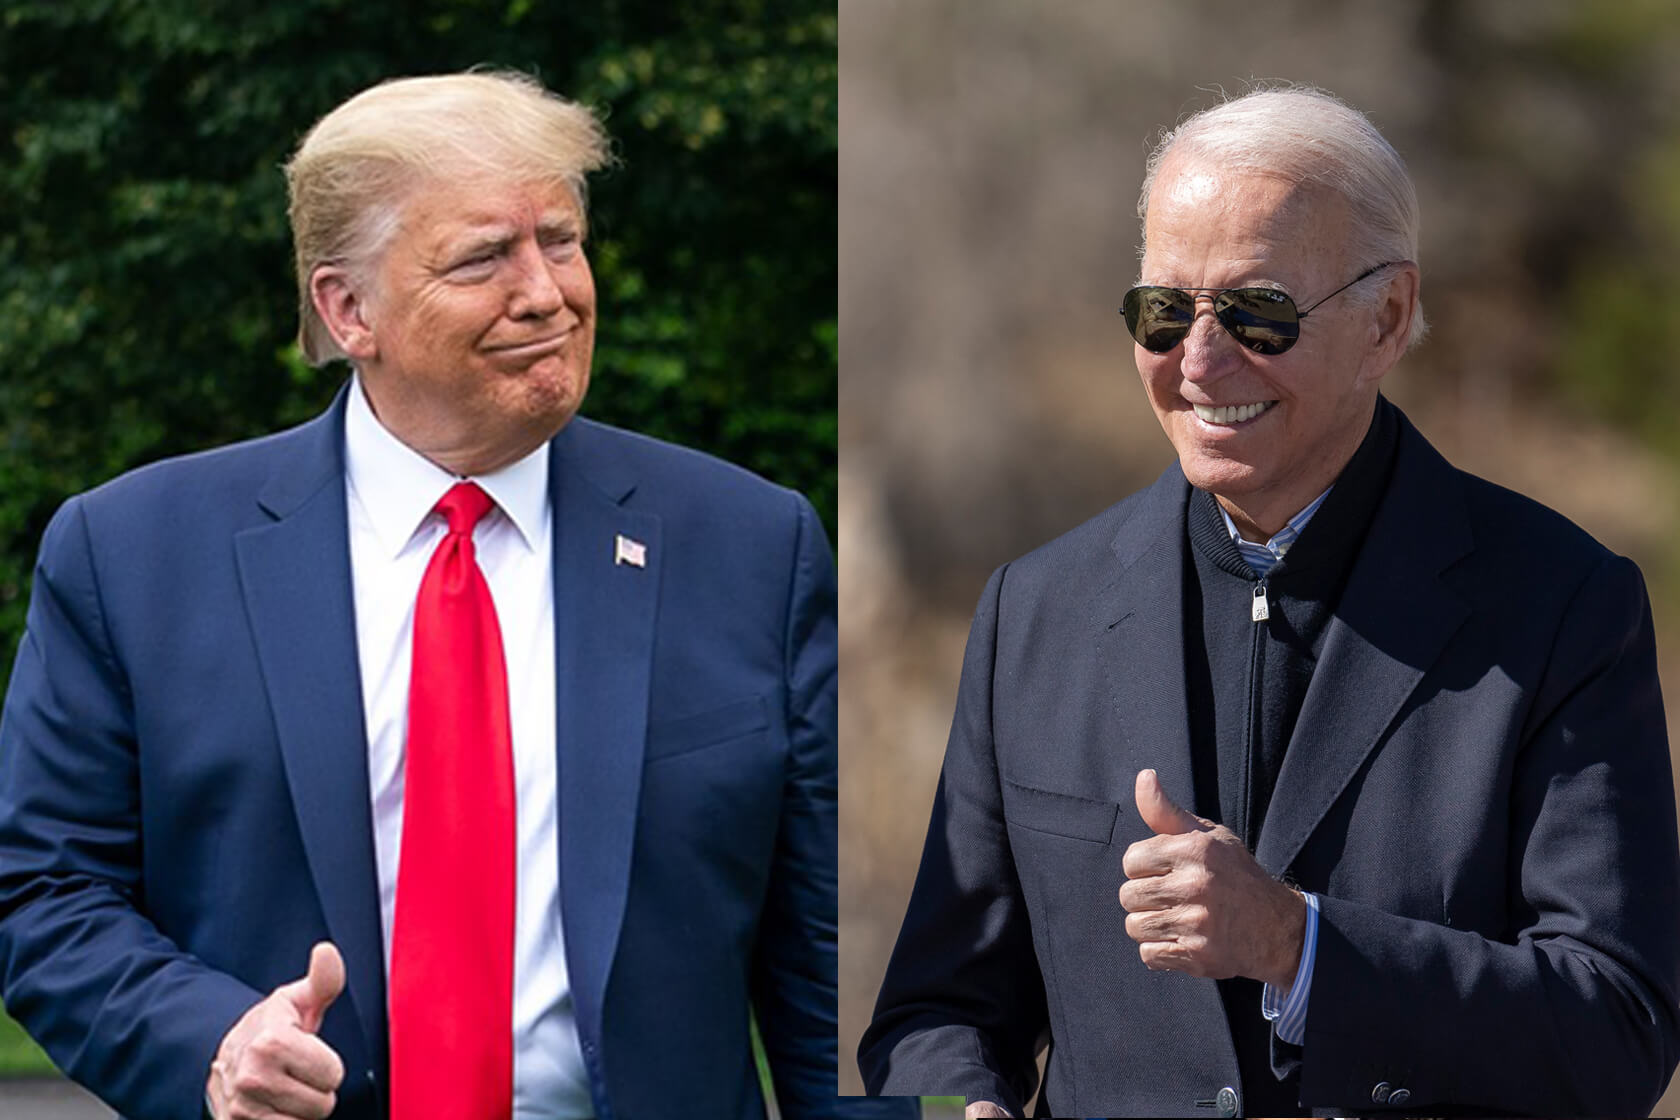 Side-by-side images of Former president Trump and President Biden.